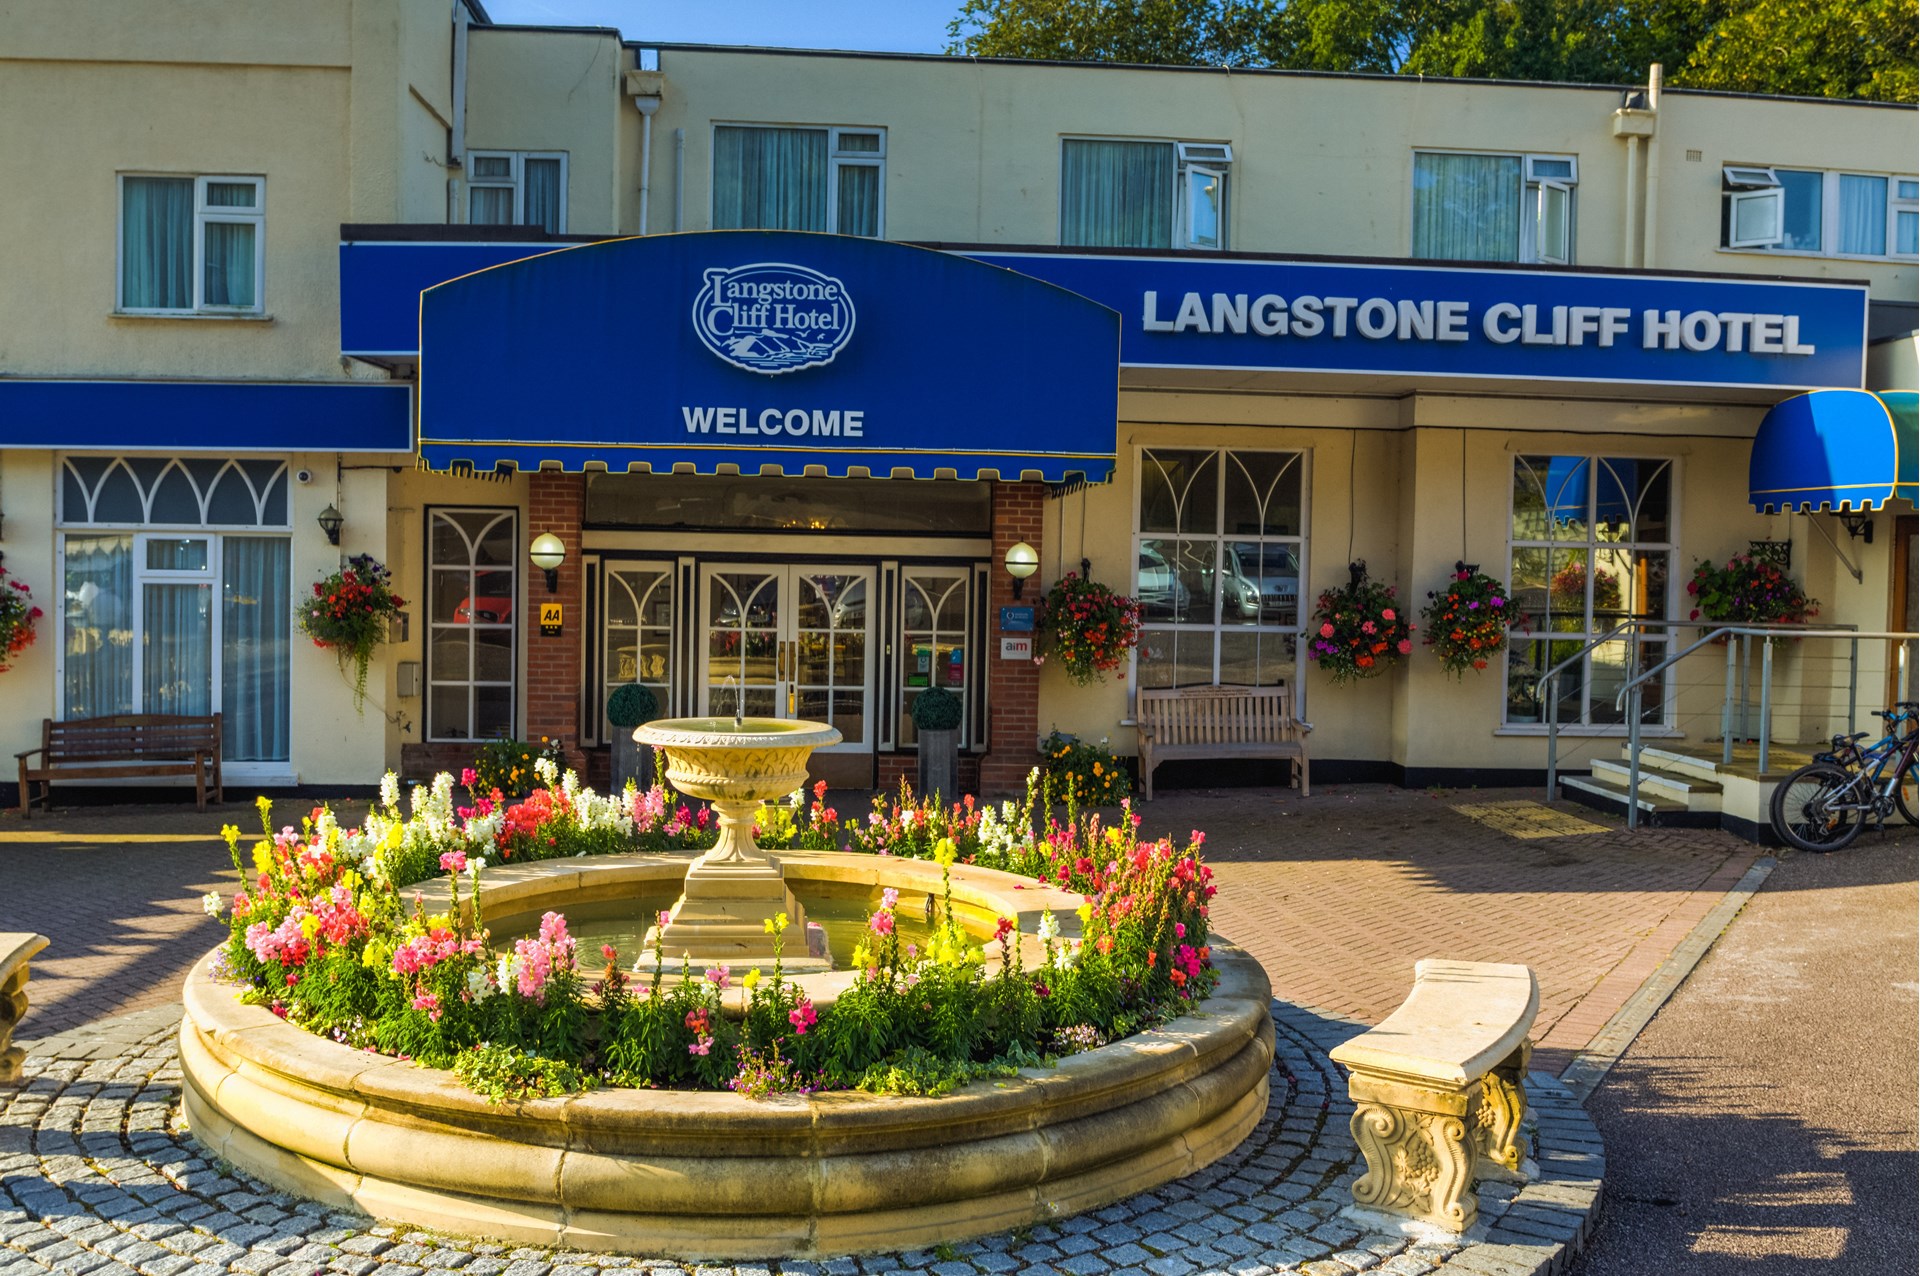 Langstone Cliff Hotel our December Host